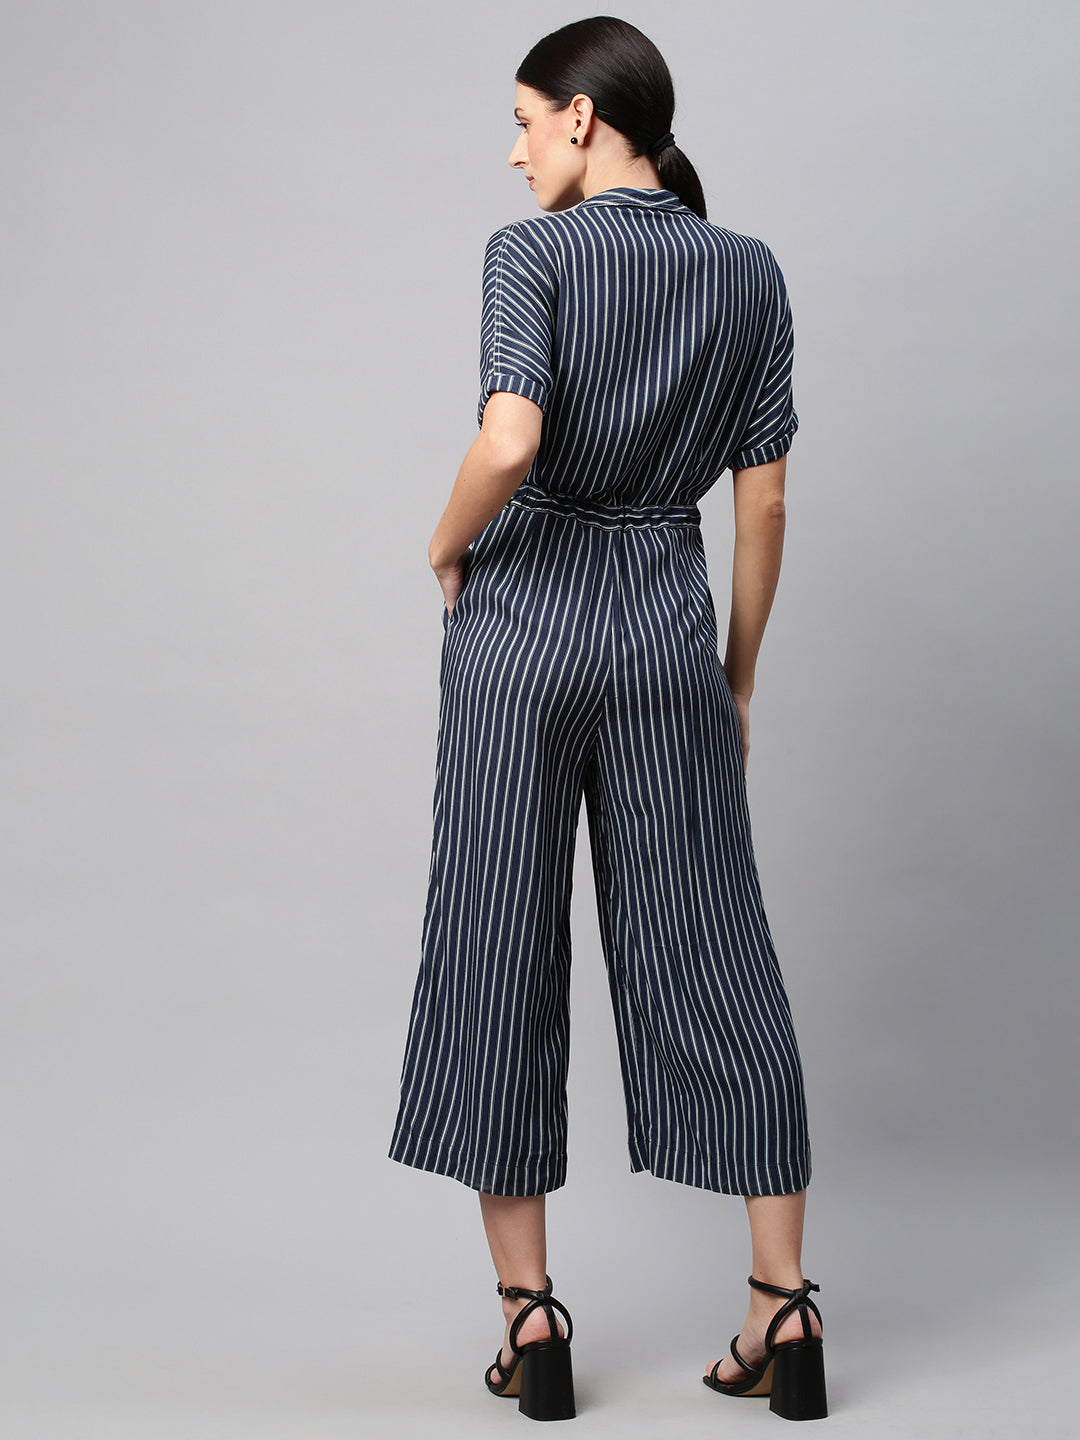 Striped Rayon Embroidered Jumpsuit